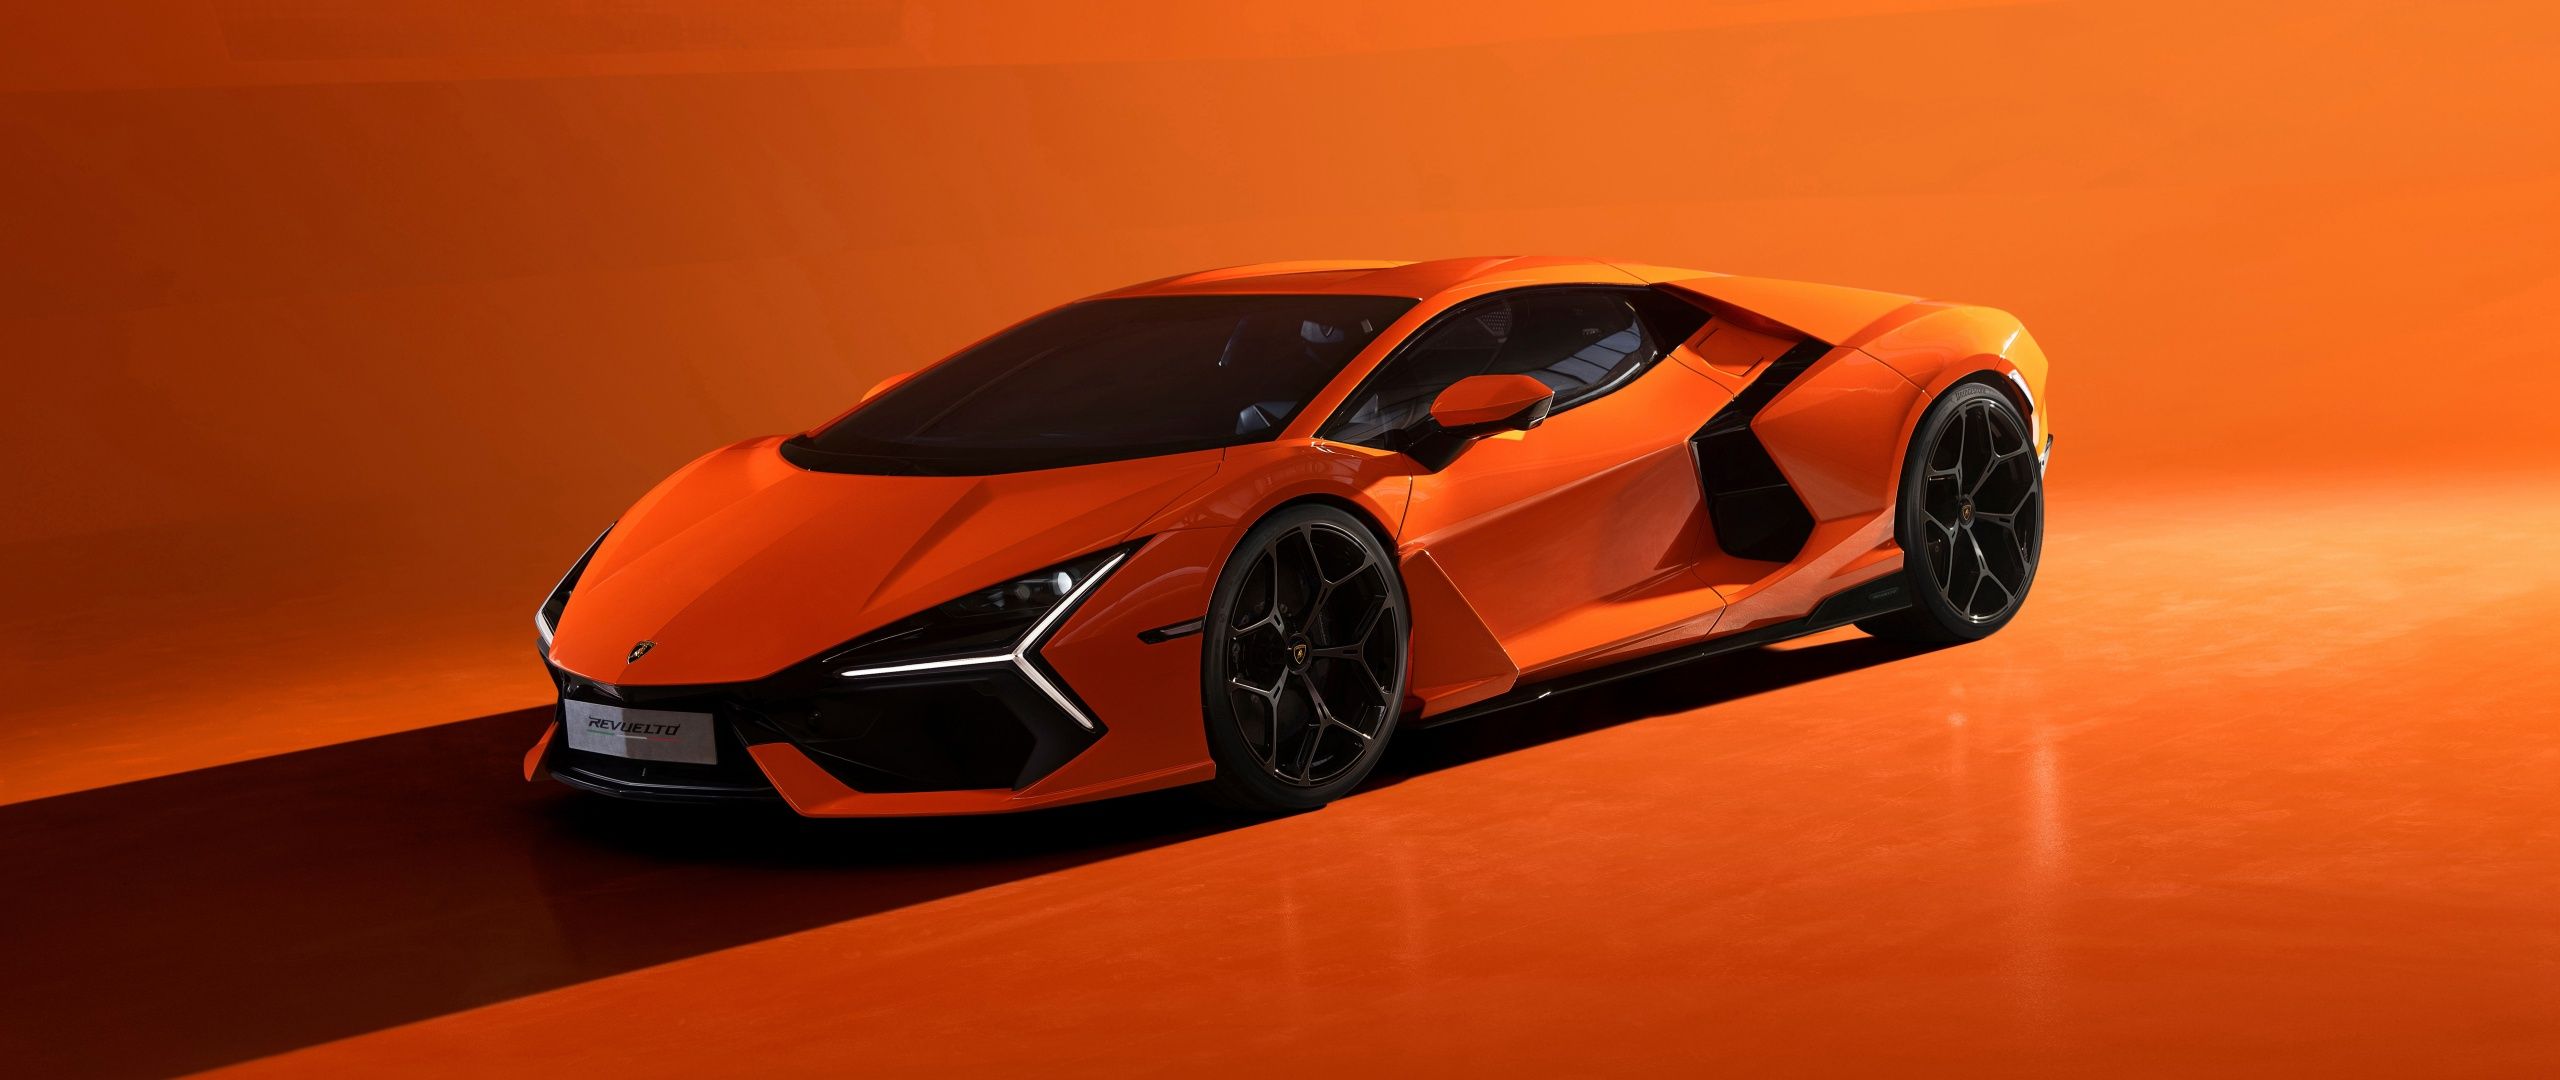 Lamborghini's new hybrid supercar, the Sián, is a limited edition that uses a V12 engine and three electric motors to produce a combined 1,914 horsepower. - Cars